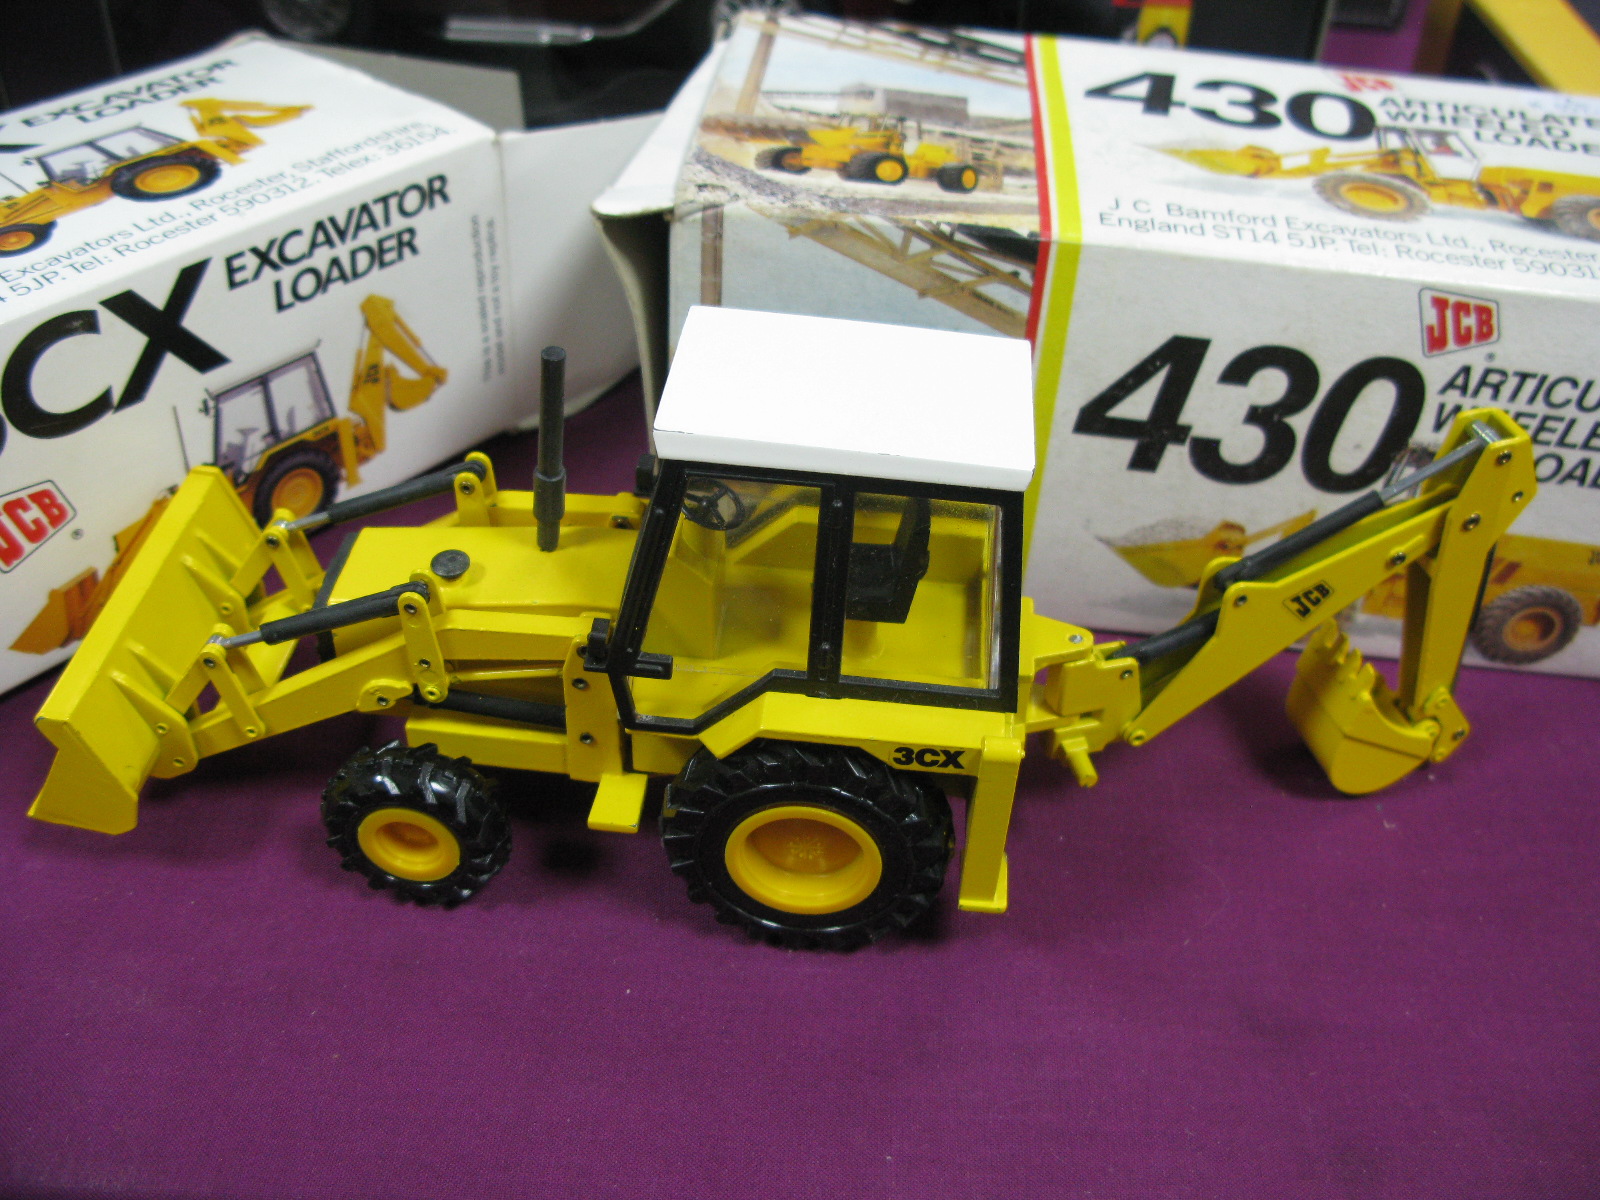 Two NZG Modelle (Germany 1:35th Scale Diecast Model Plant Machinery Construction Vehicles, #277